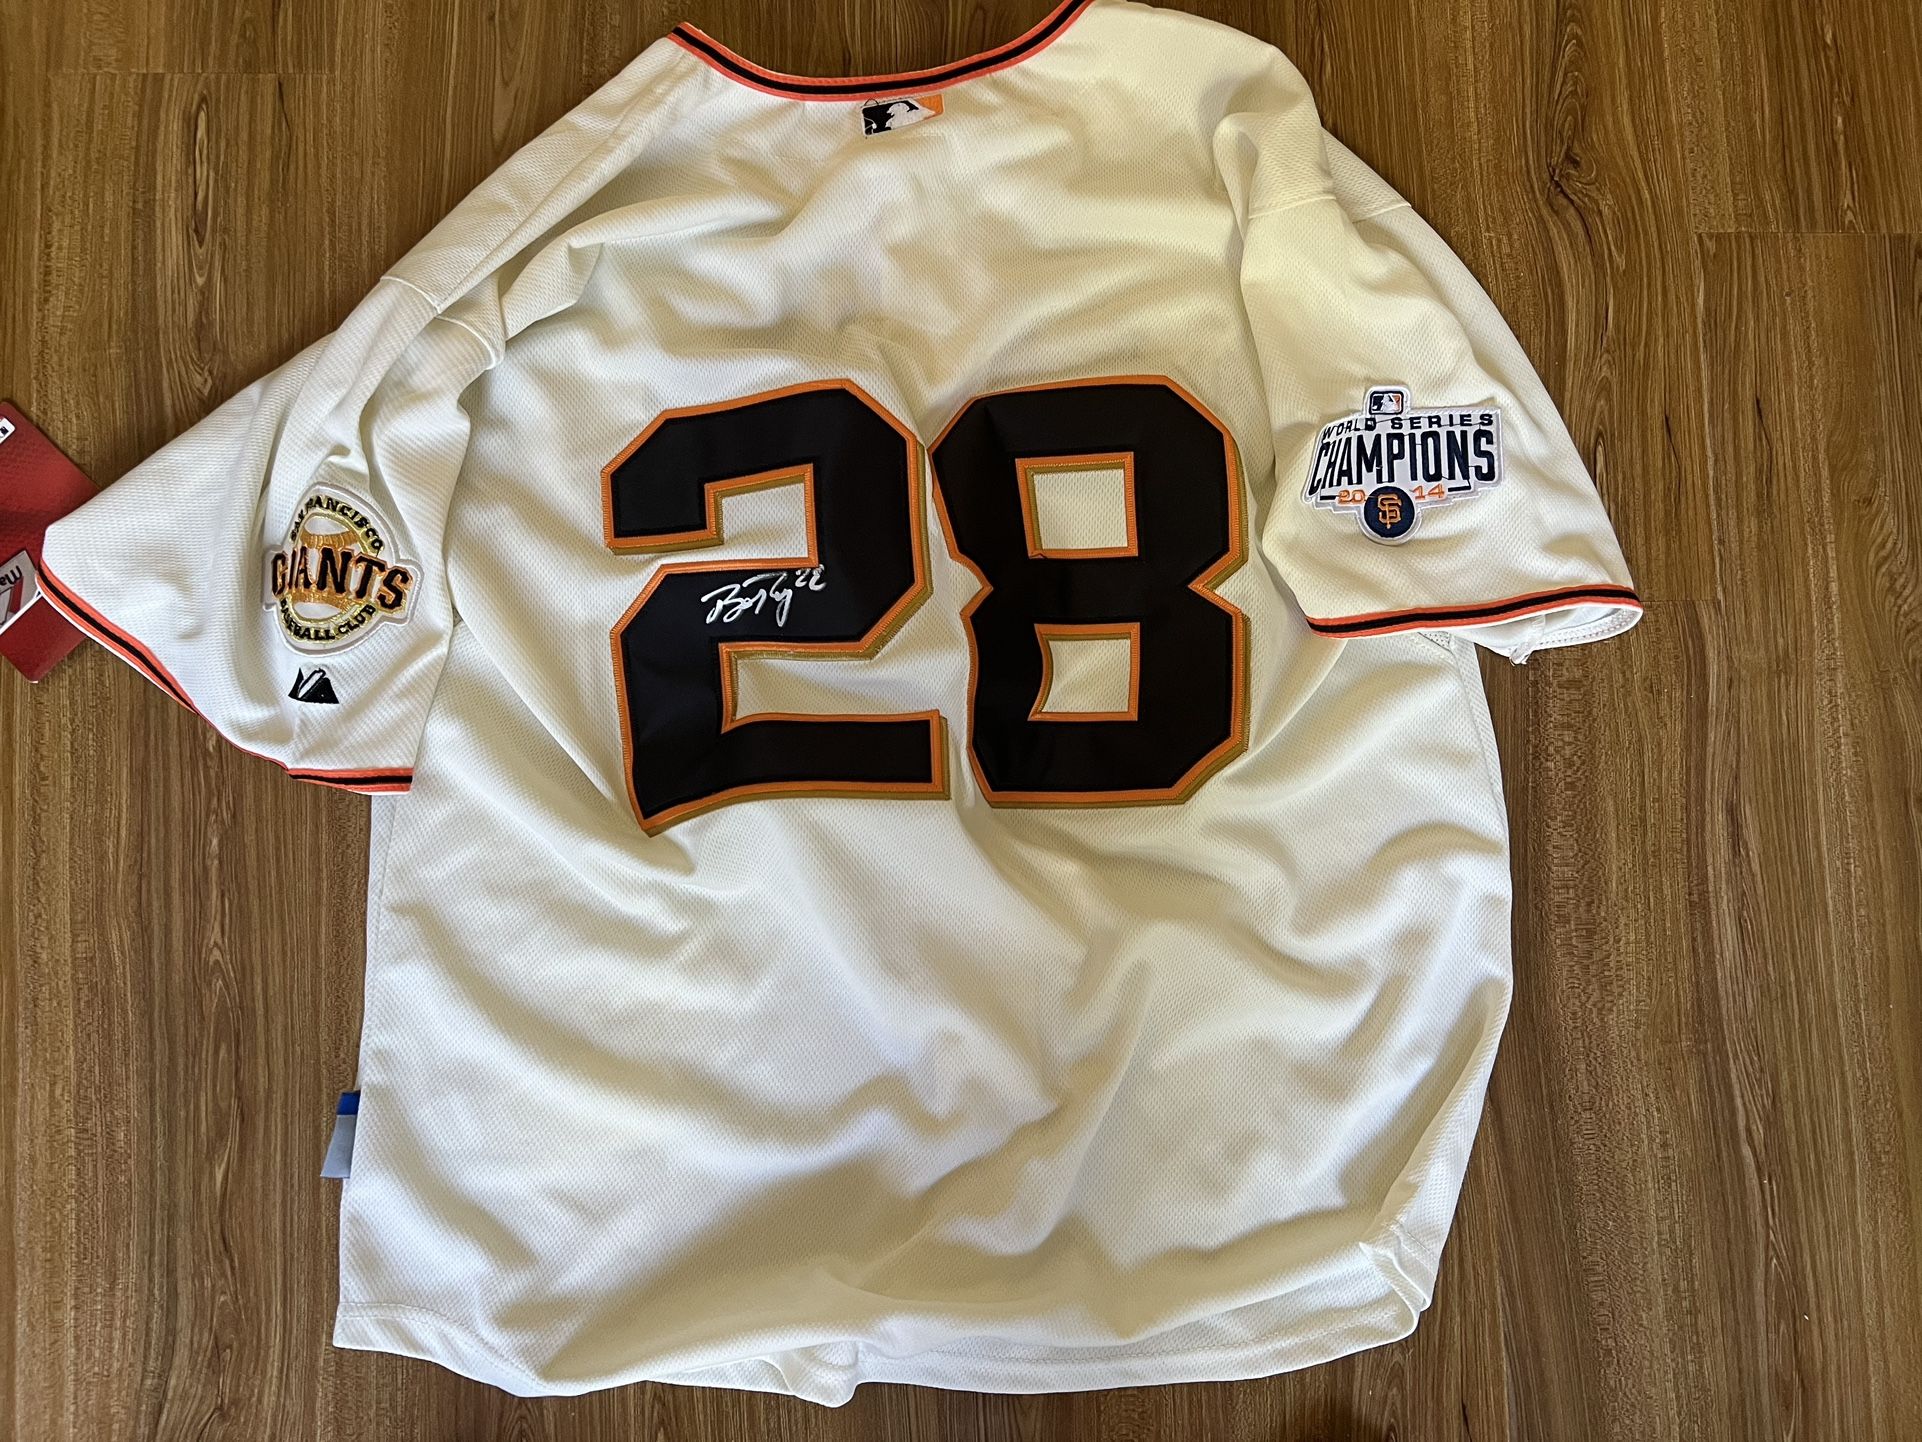 Buster Posey Autographed 2014 World Series Jersey for Sale in San Diego, CA  - OfferUp